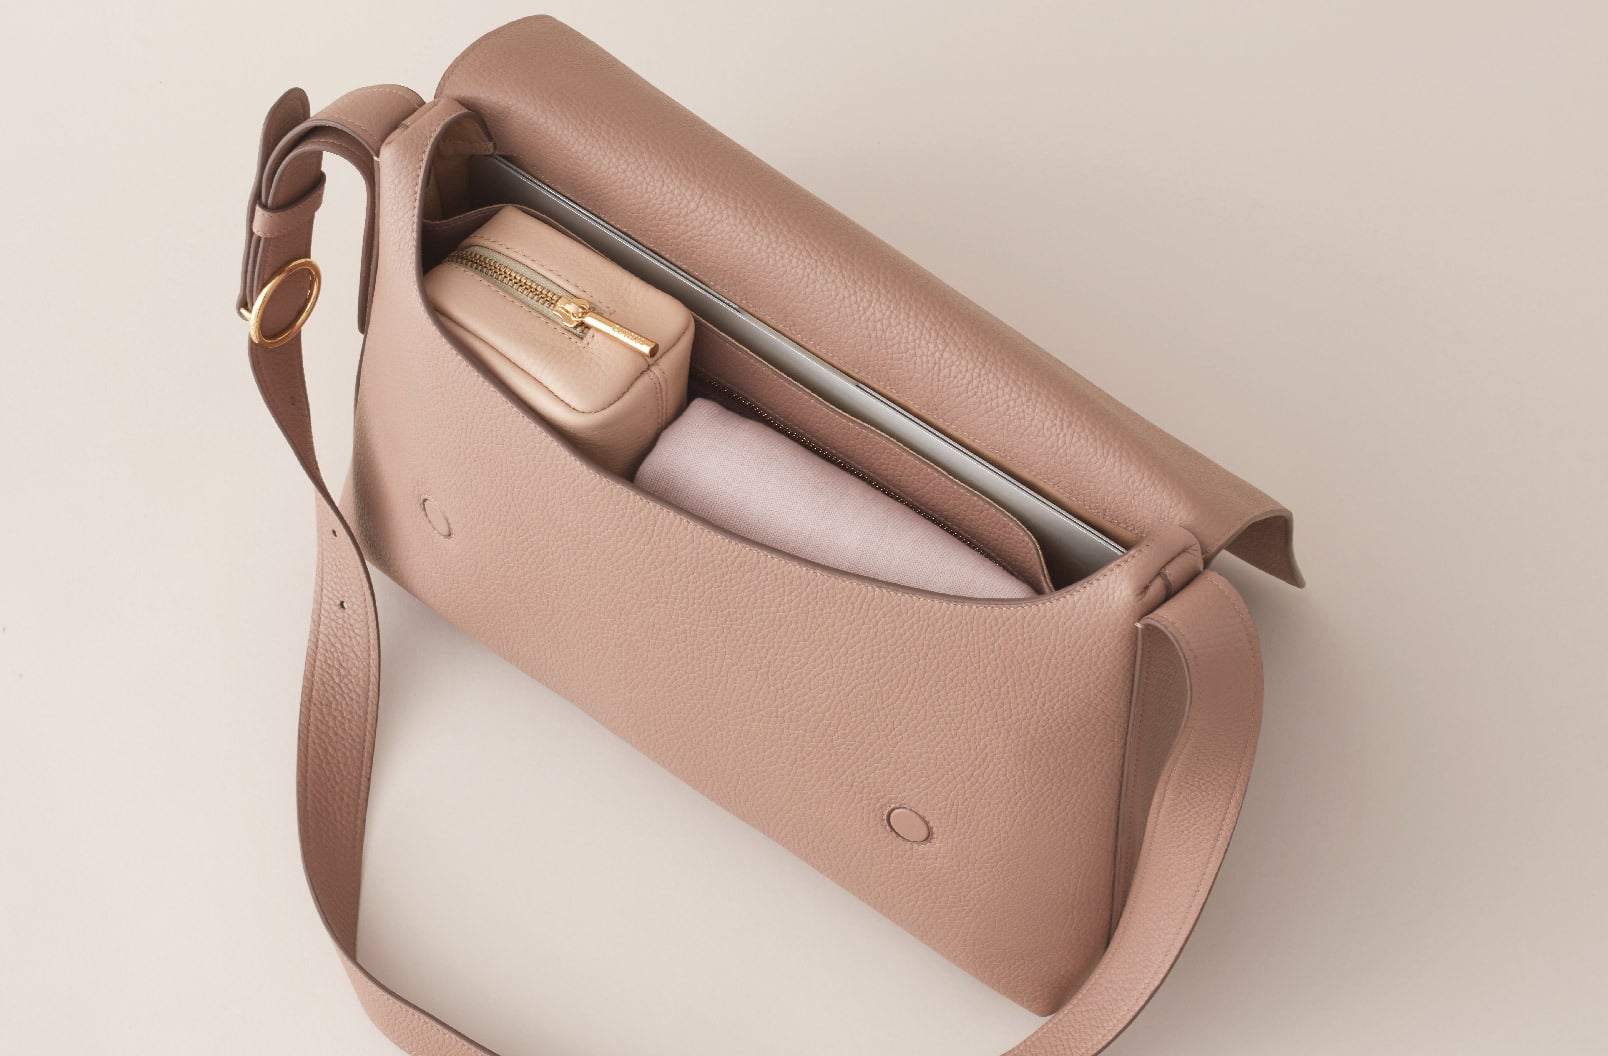 the ultimate designer bag list: 10+ bags that fit your work laptop